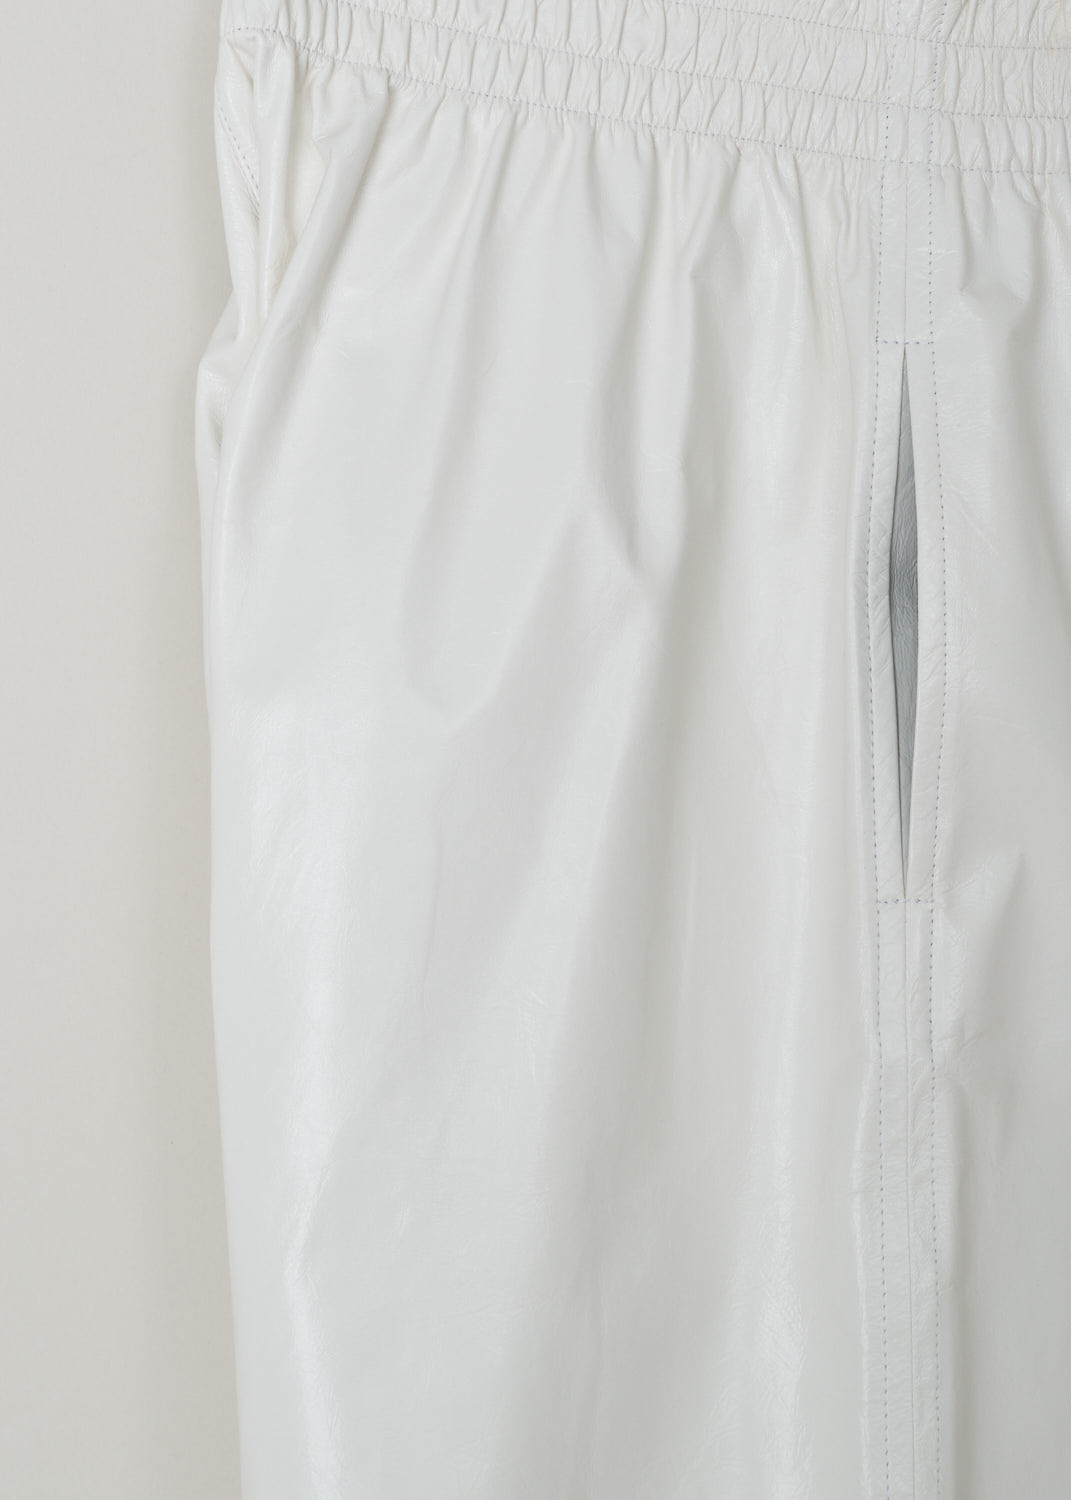 Bottega Veneta, White patent leather shorts, 633445_VKLC0_9068, white, detail, these shorts made from white shiny leather. Featuring an oversized fit with the slip-in pockets being on the side seam, the elastic waistband acts as you fastening method on this model. 